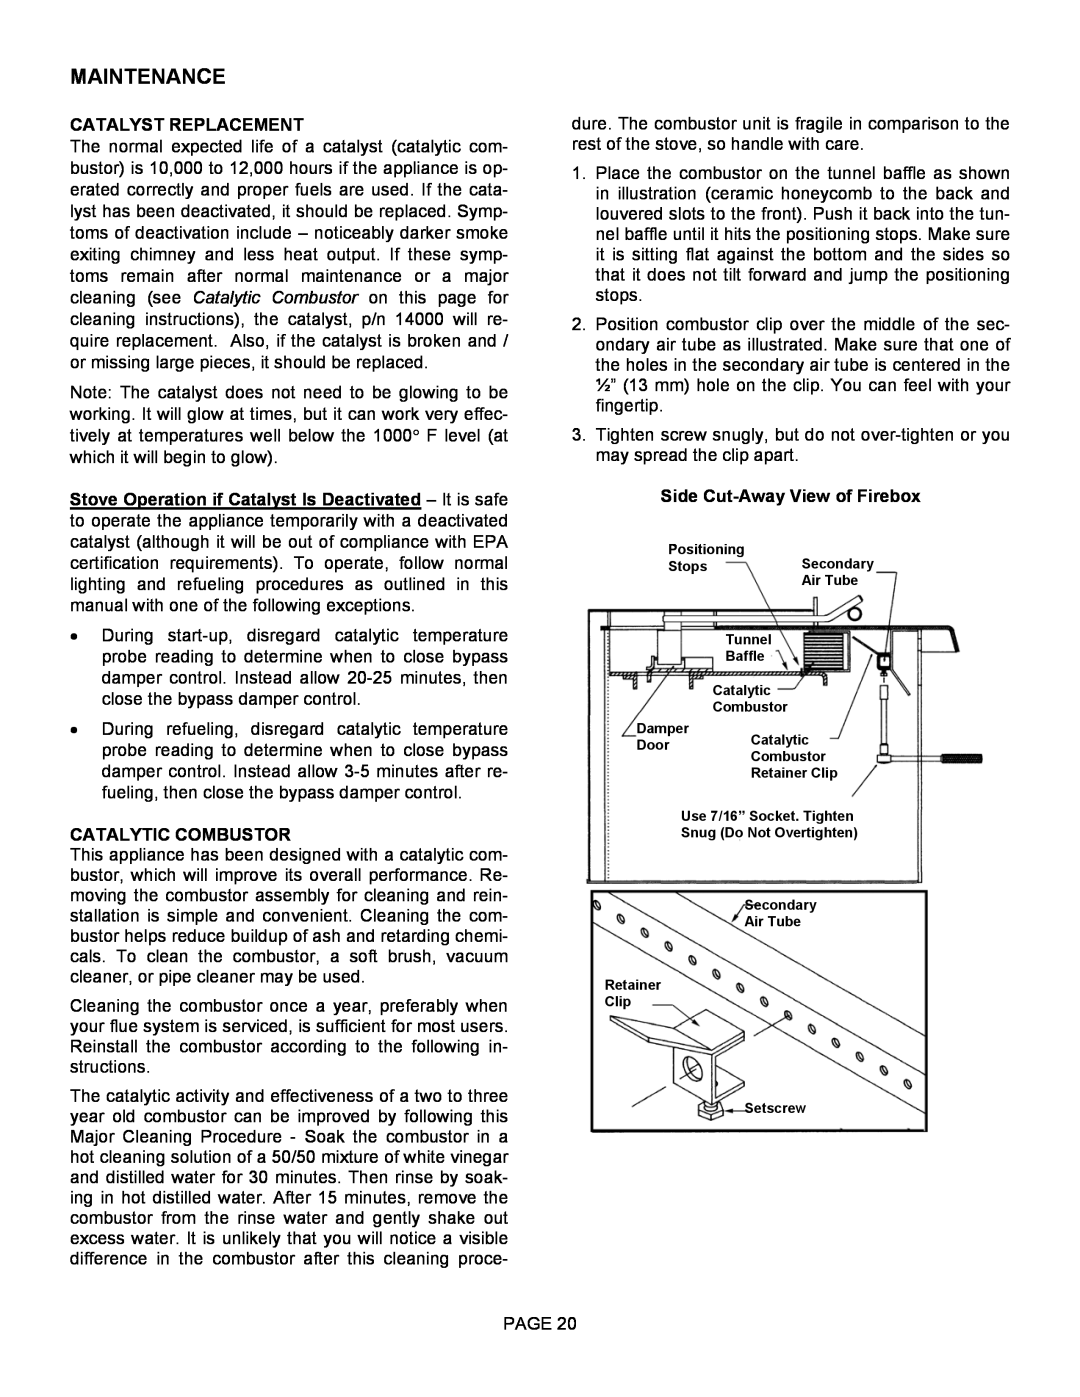 Lennox Hearth 1003C operation manual Catalyst Replacement, Side Cut-AwayView of Firebox, Maintenance, Catalytic Combustor 